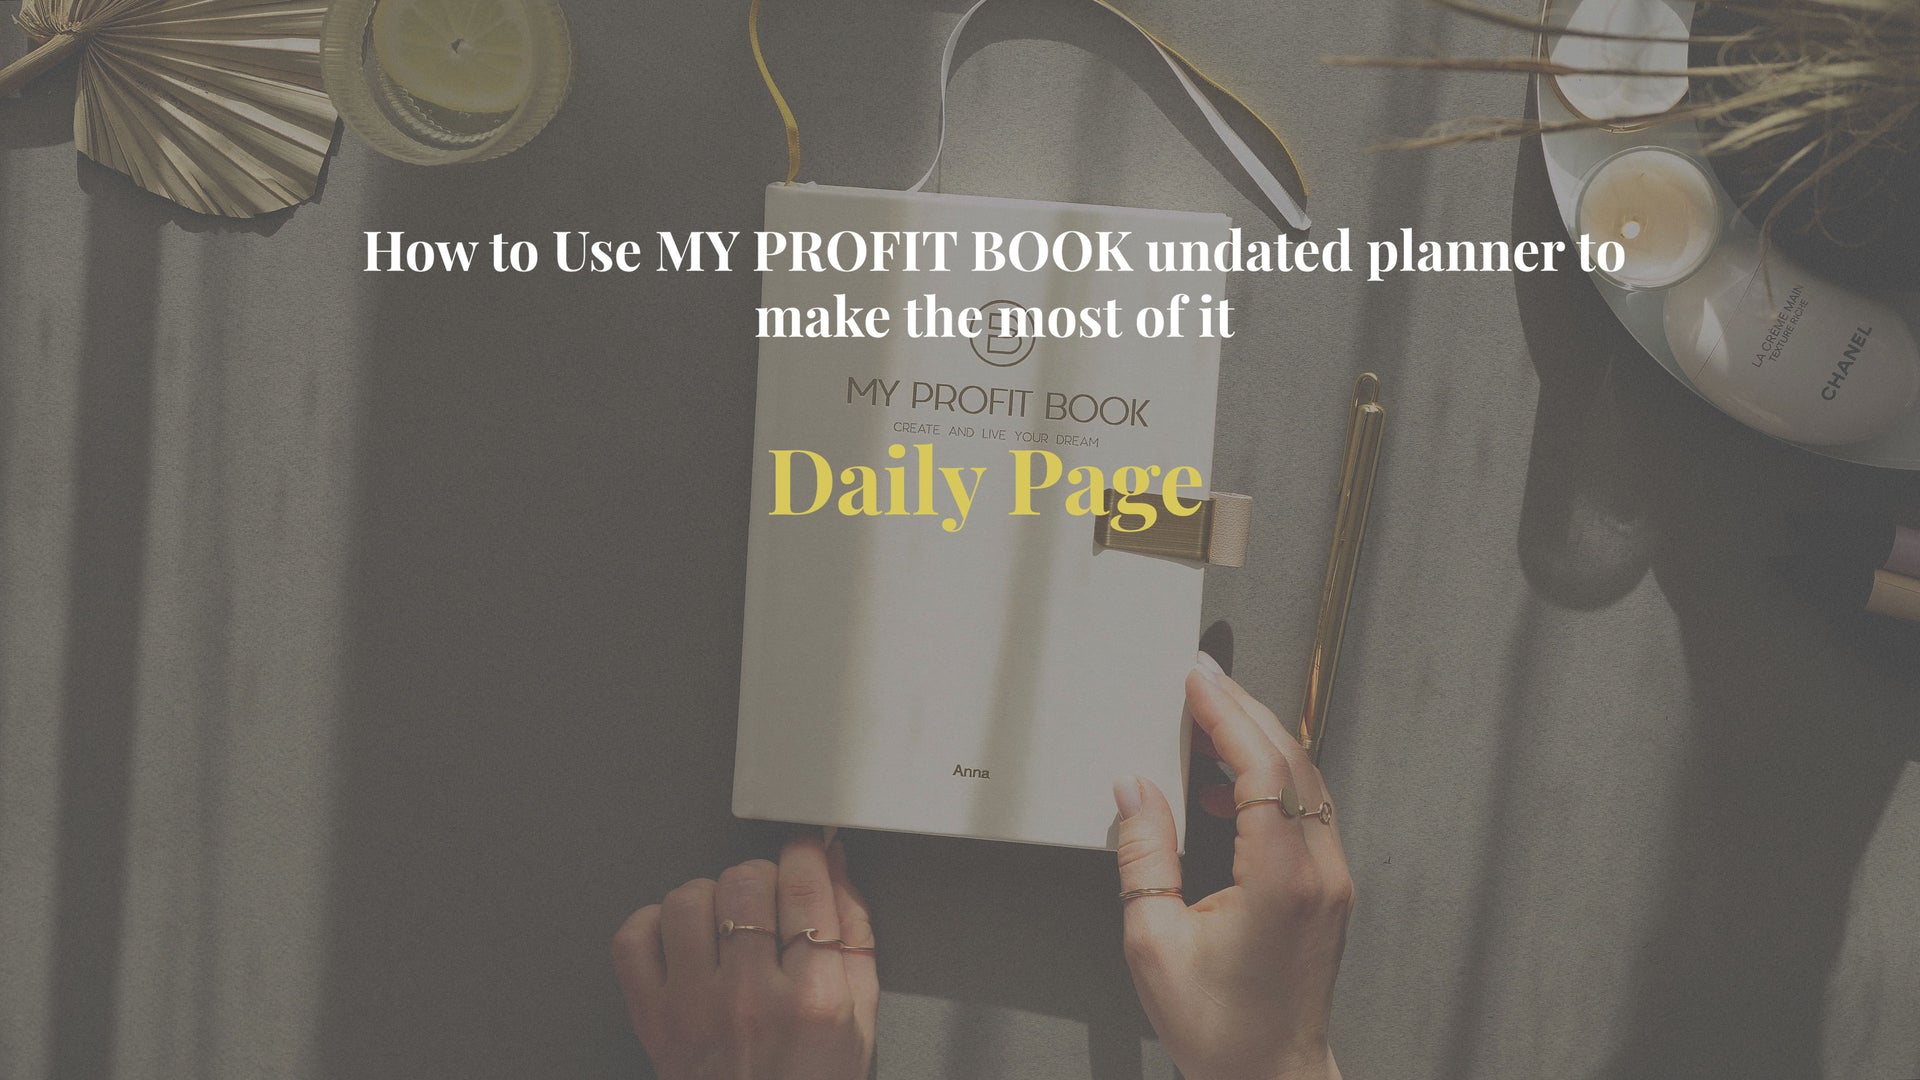 Load video: DAILY PAGES - instruction how to Use MY PROFIT BOOK undated planner